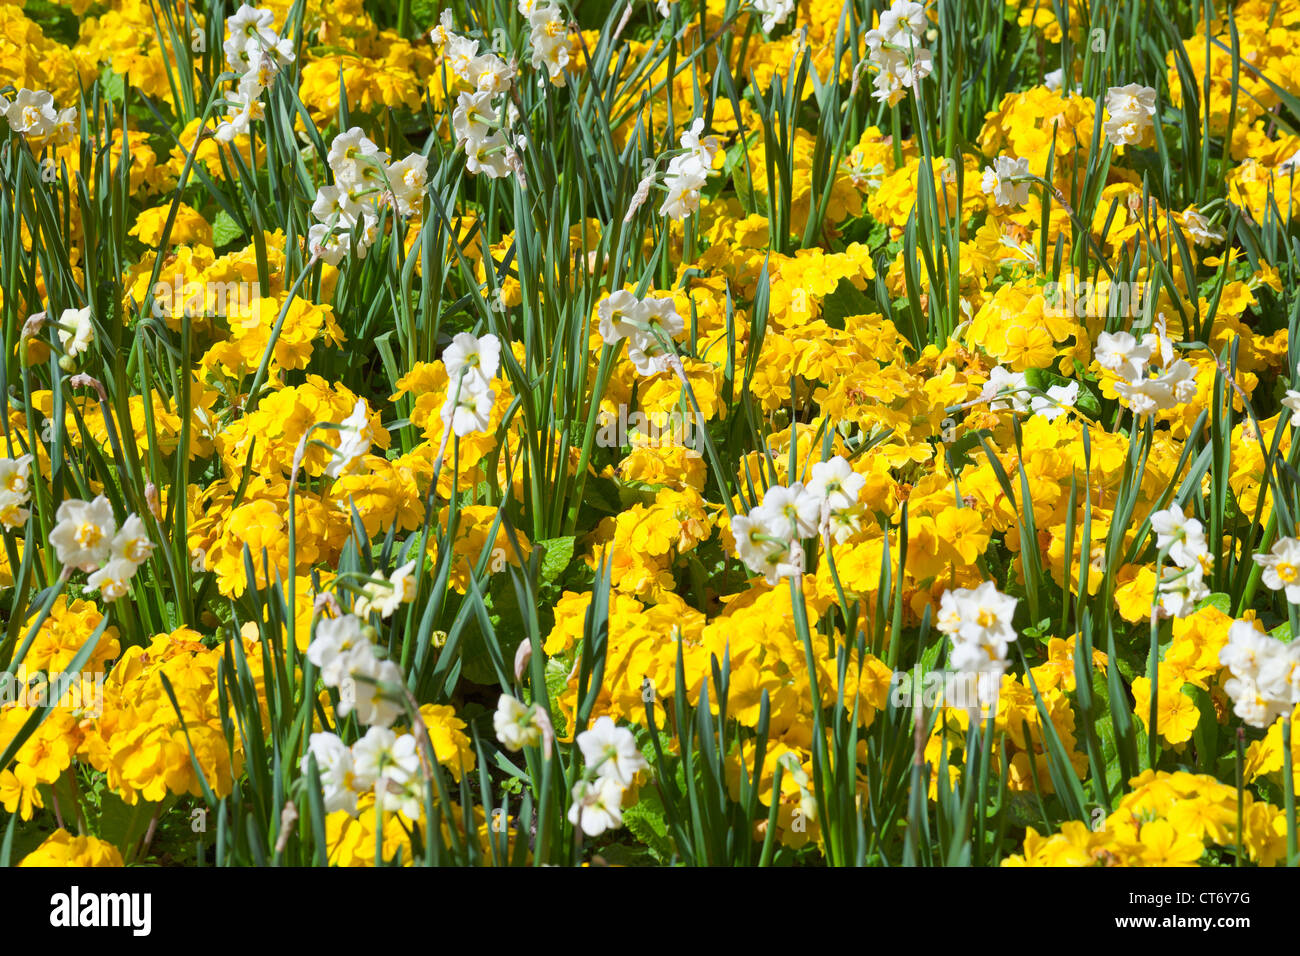 Colorful flower bed with yellow primroses and daffodils, UK Stock Photo